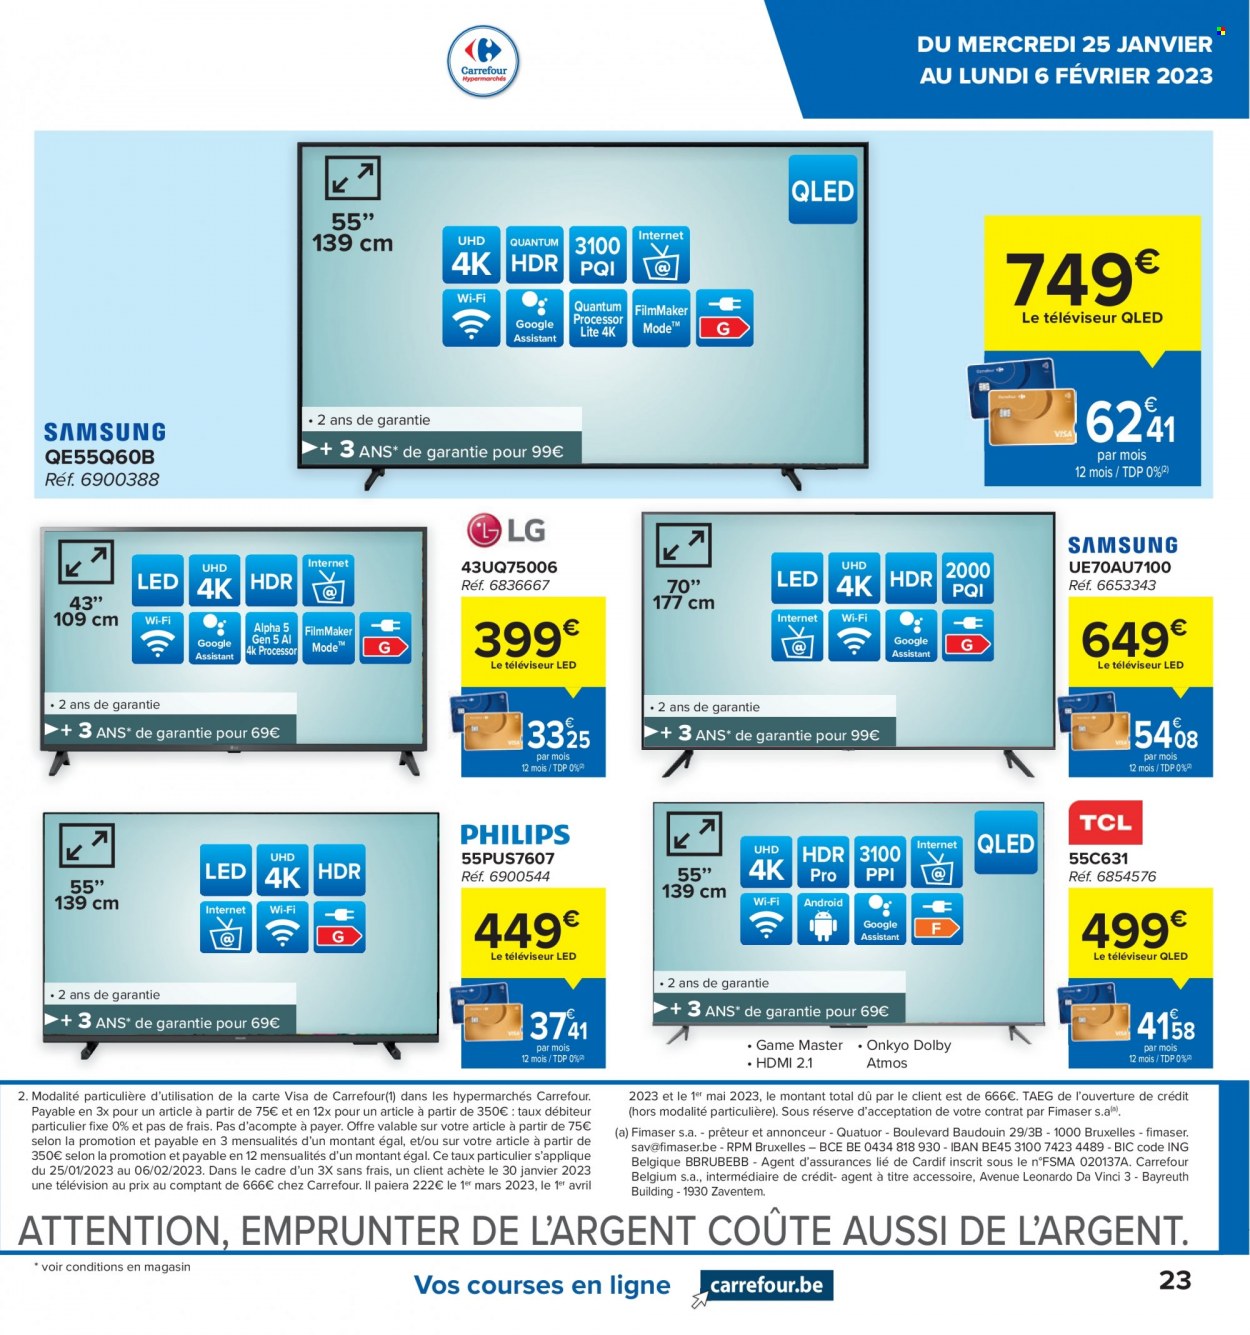 Catalogue Carrefour hypermarkt - 25.1.2023 - 6.2.2023. Page 3.